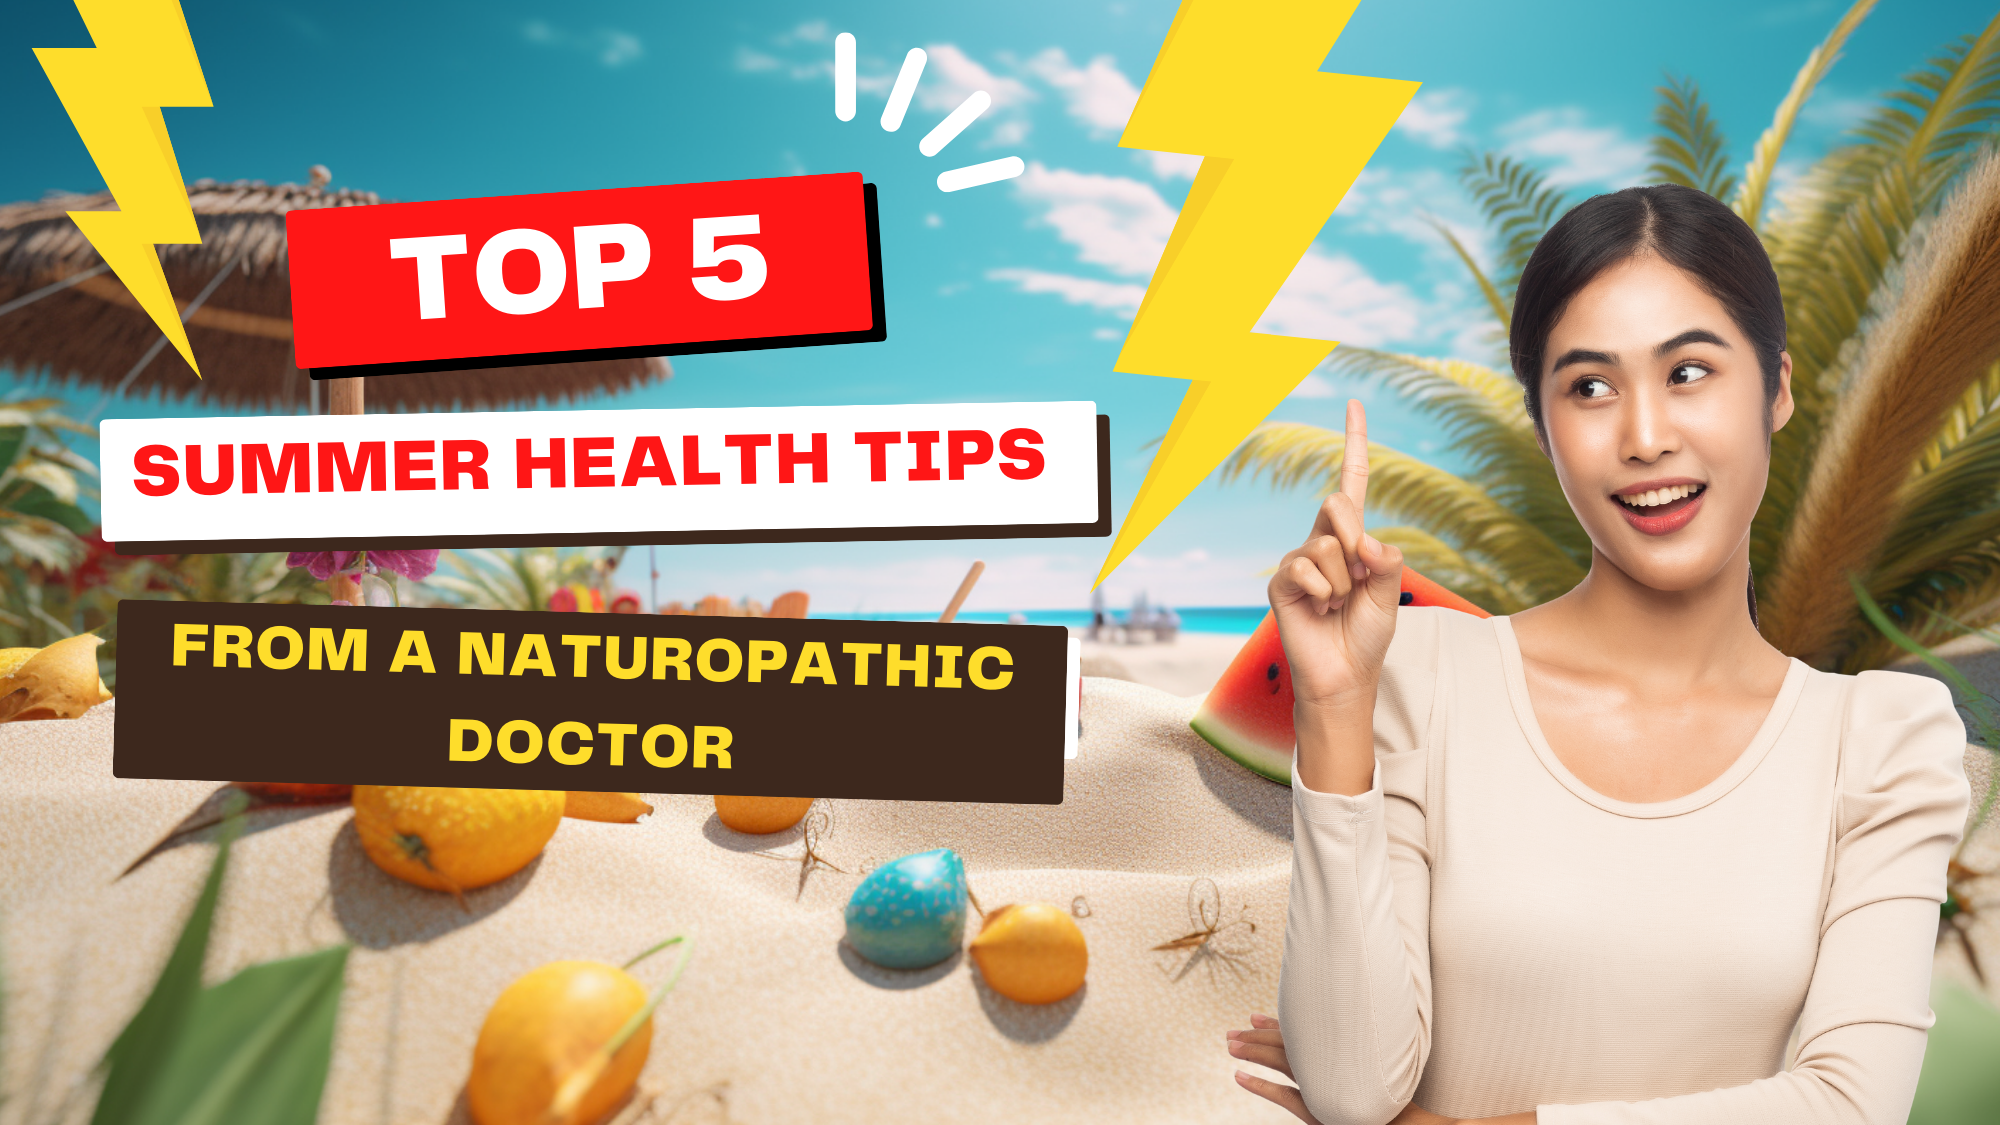 Your Perfect Summer: Top 5 Summer Health Tips from a Naturopathic Doctor